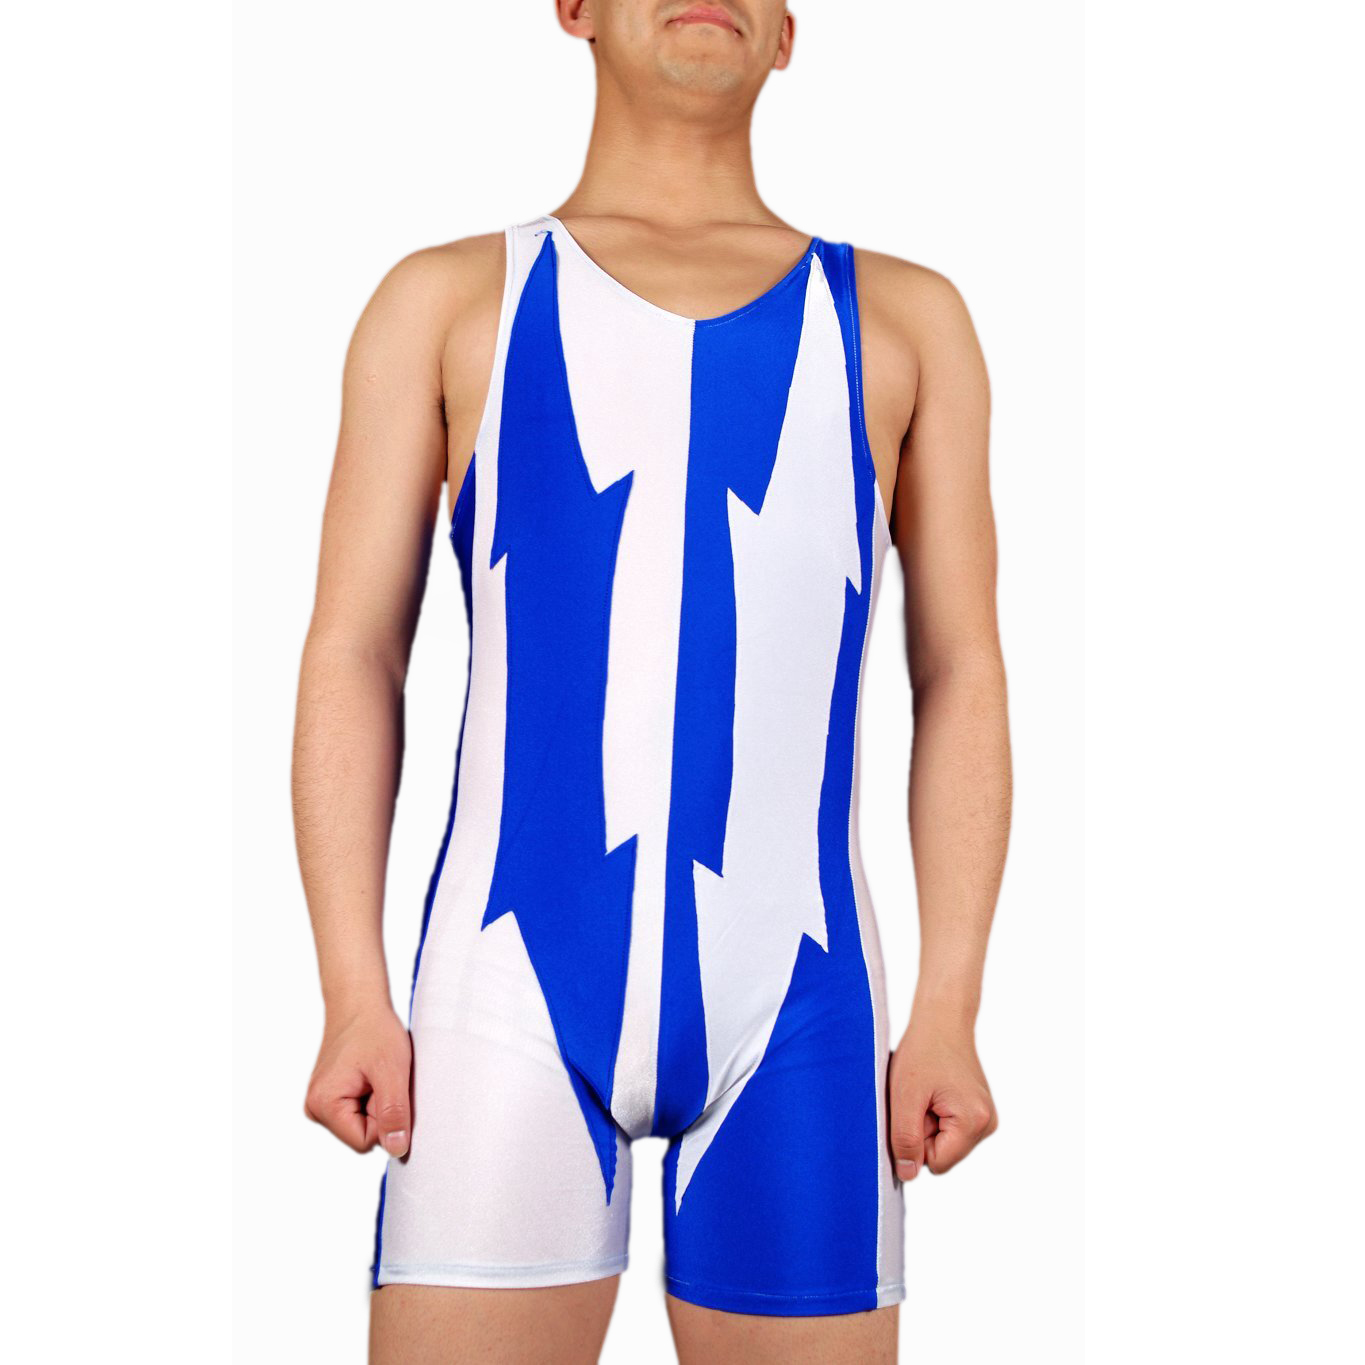 Men's Jumpsuit-styled White and Blue Lycra Spandex Sleeveless Ca